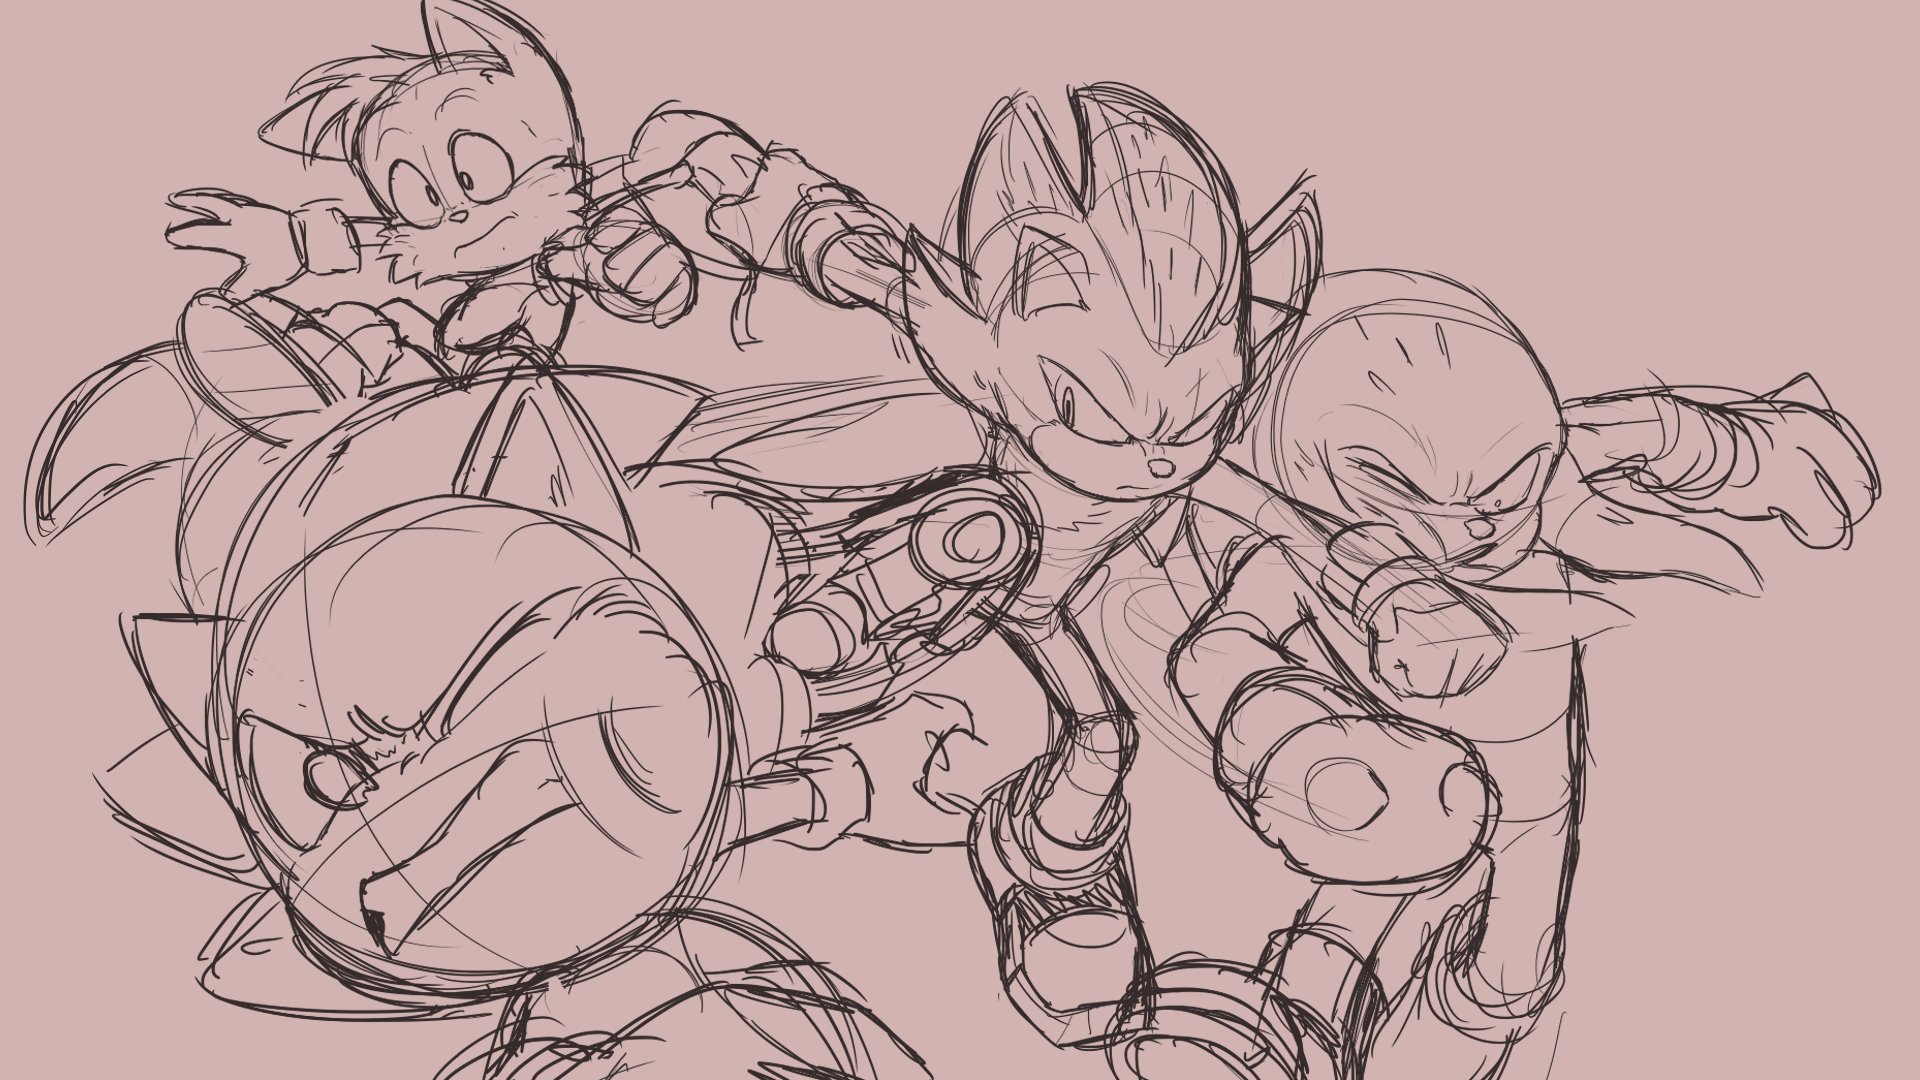 Justin M. on X: (WIP) Getting a lockdown on the style I'll be drawing the  movie versions of Team Sonic #SonicMovie2 #sonicmovie #SonicTheHedgehog  #sonicart #sonicartist #Sonic30th #sonicfanart  / X